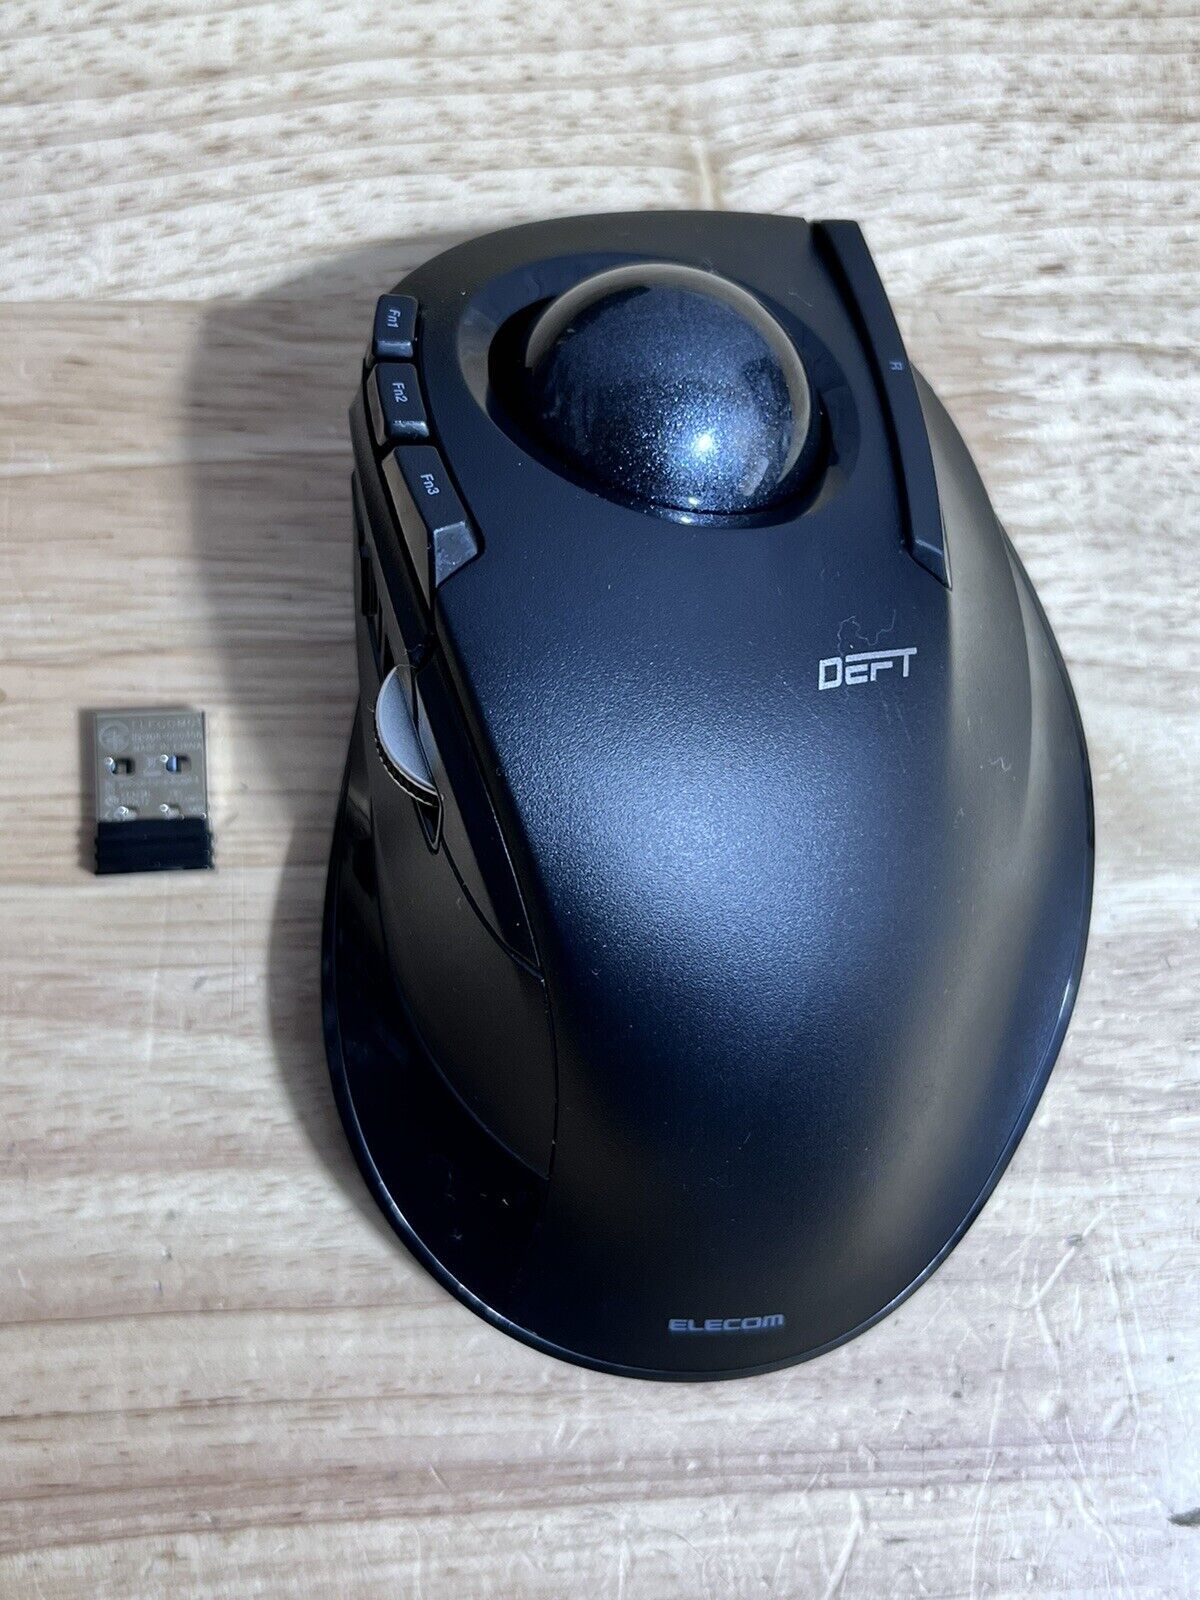 Elecom Deft M-DT2DR Black Gaming Wireless Trackball Mouse With Receiver Tested